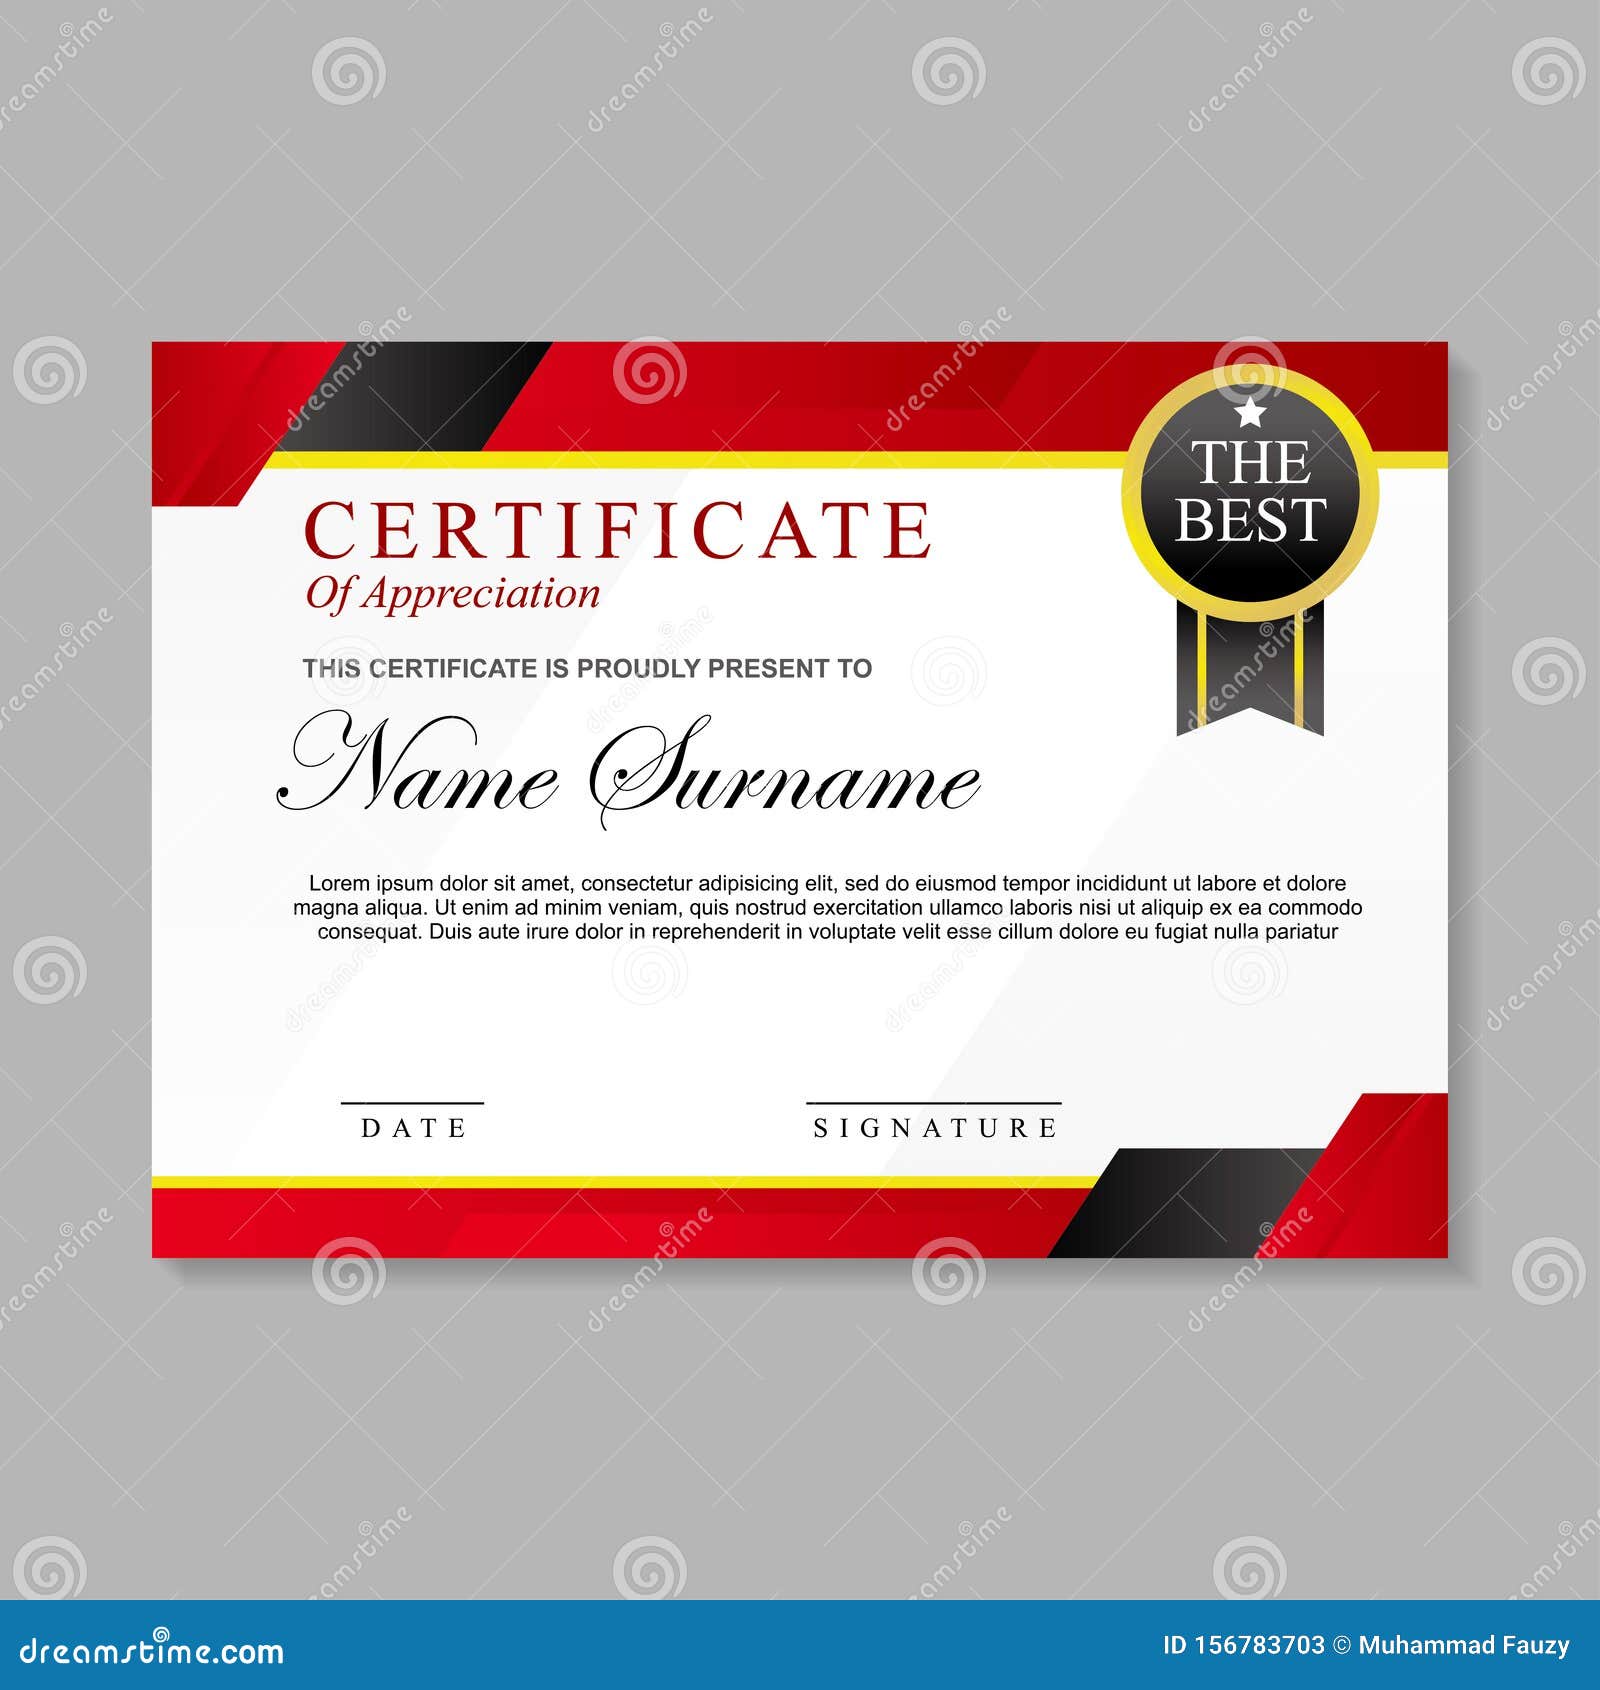 Certificate Template Design with Red, White and Black Color Stock Throughout Referral Certificate Template